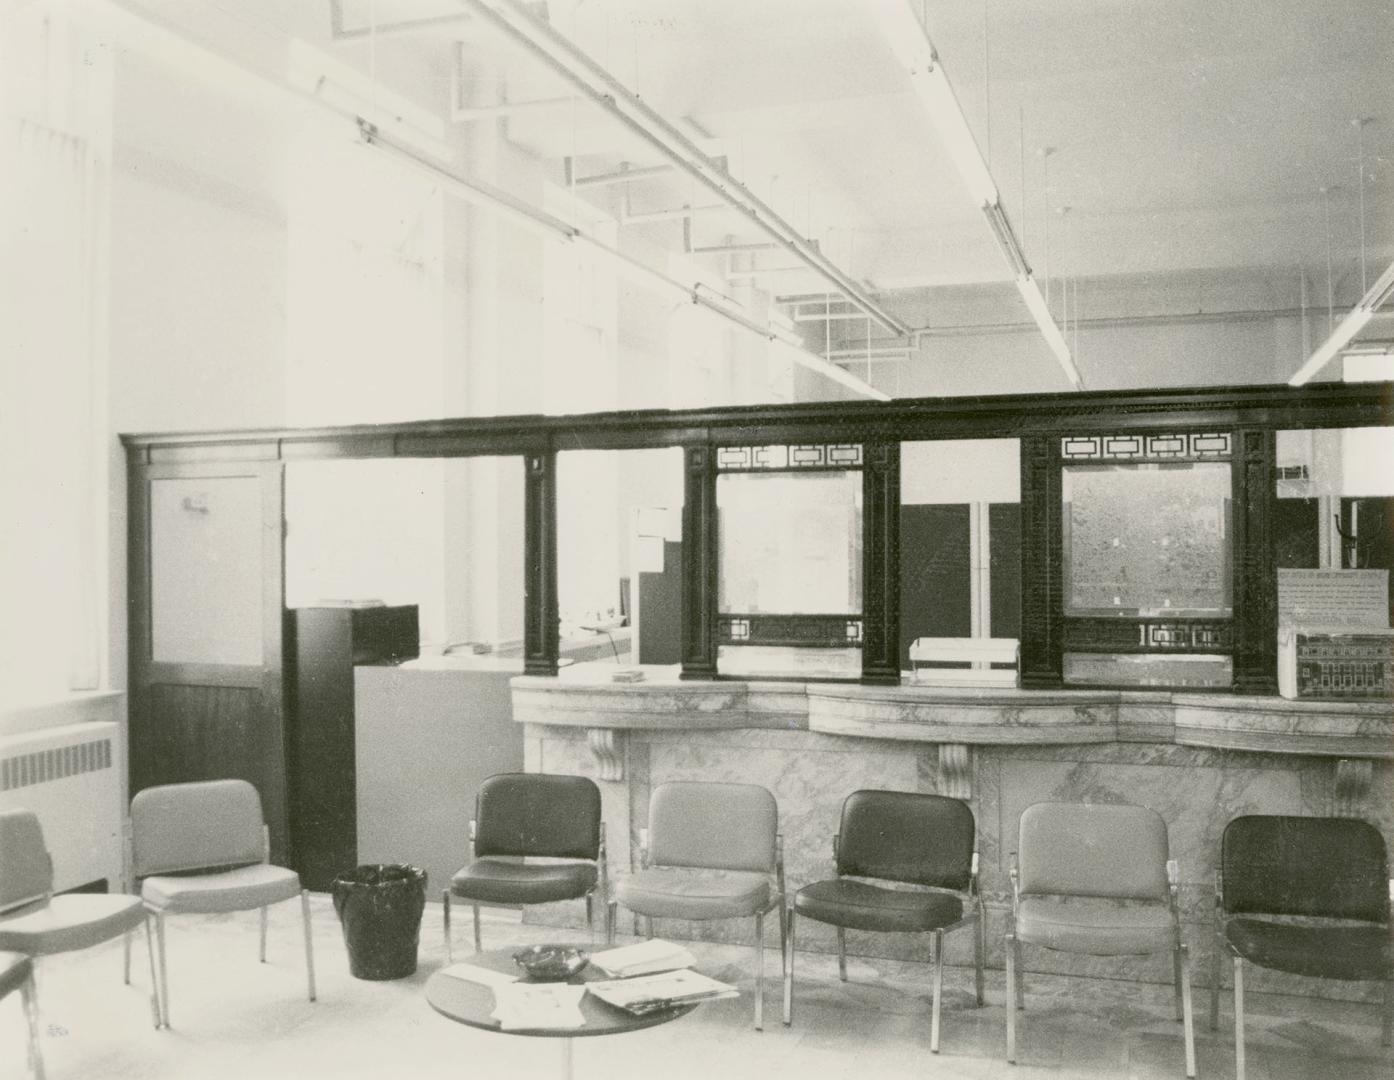 Picture of interior of postal station showing marble counters and a line of chairs. 